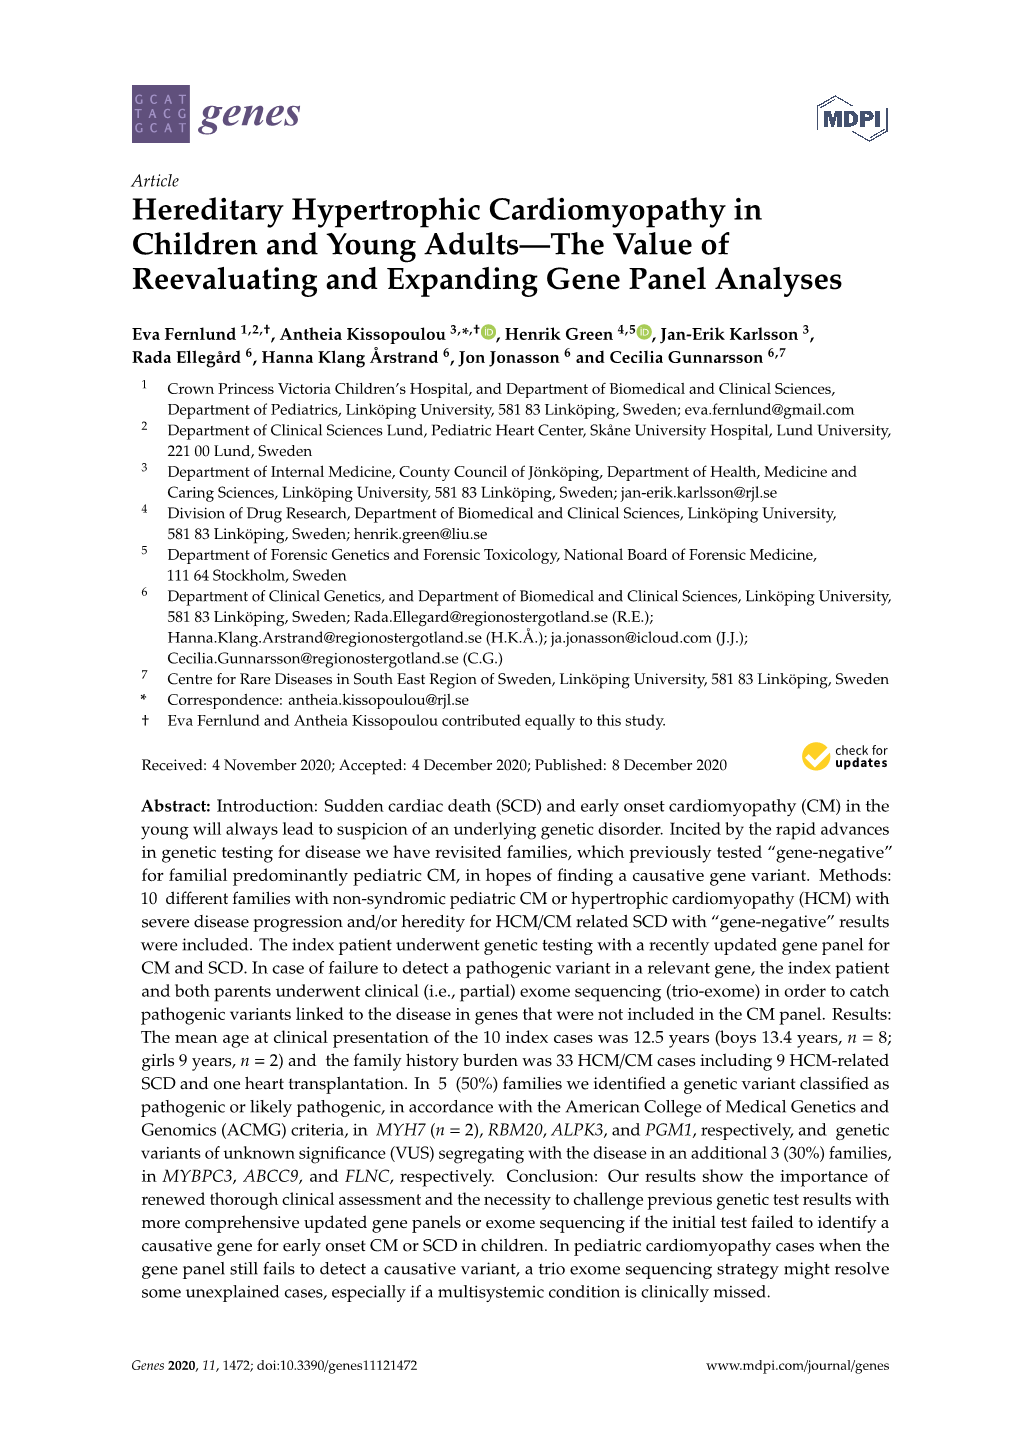 Hereditary Hypertrophic Cardiomyopathy in Children and Young Adults—The Value of Reevaluating and Expanding Gene Panel Analyses